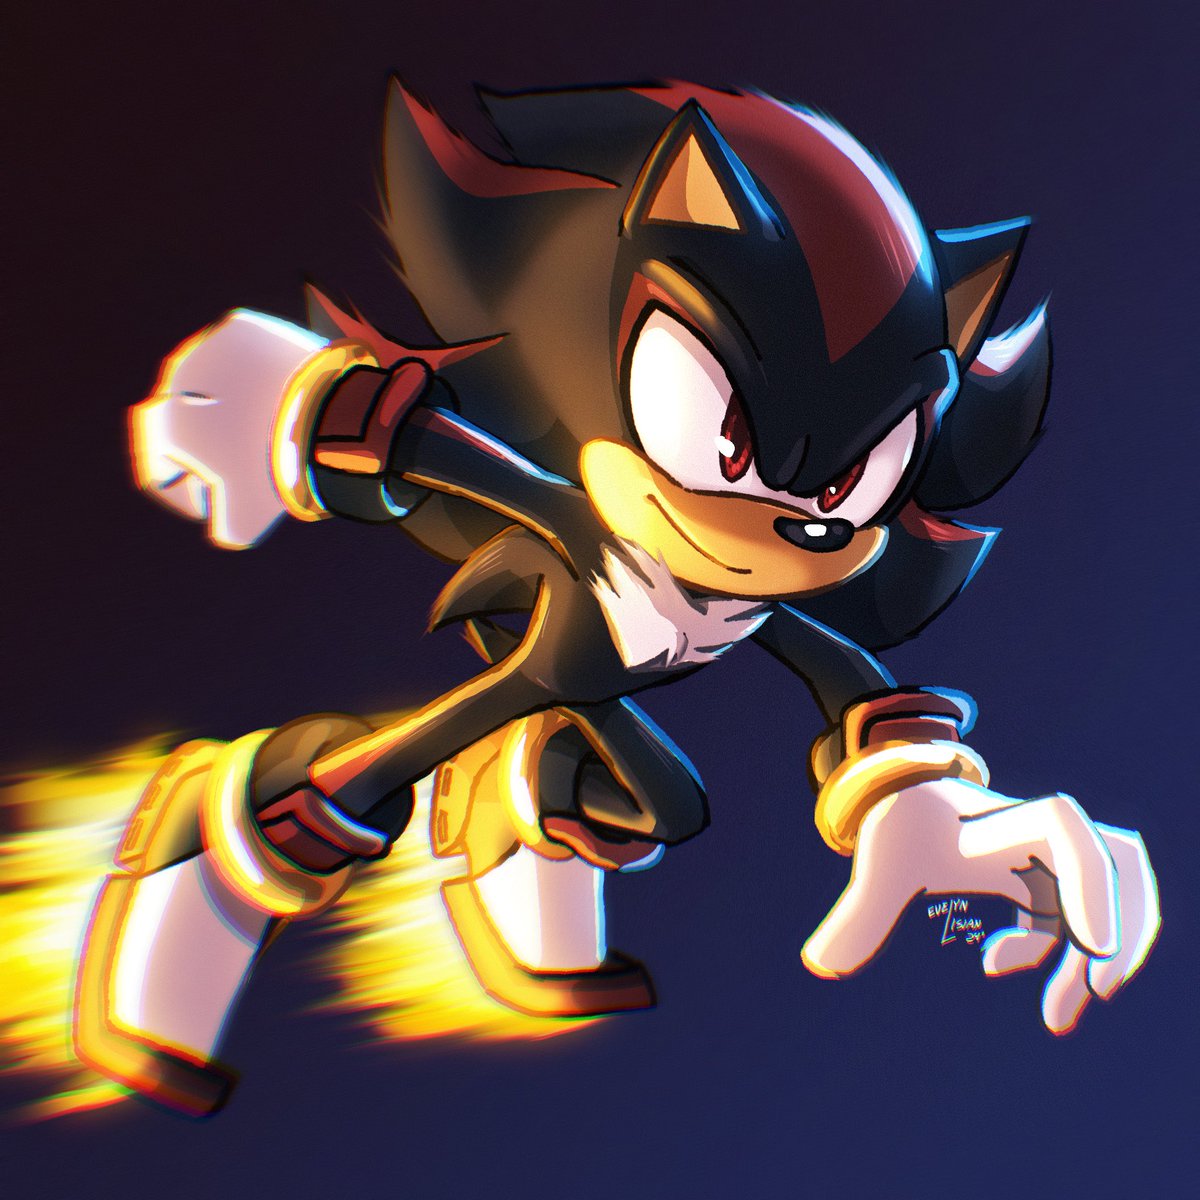 LET’S F*CKING GO!!!

#FearlessYearOfShadow #YearOfShadow #ShadowTheHedgehog #Sonic #SonicTheHedgehog #Redraw #SonicArtist